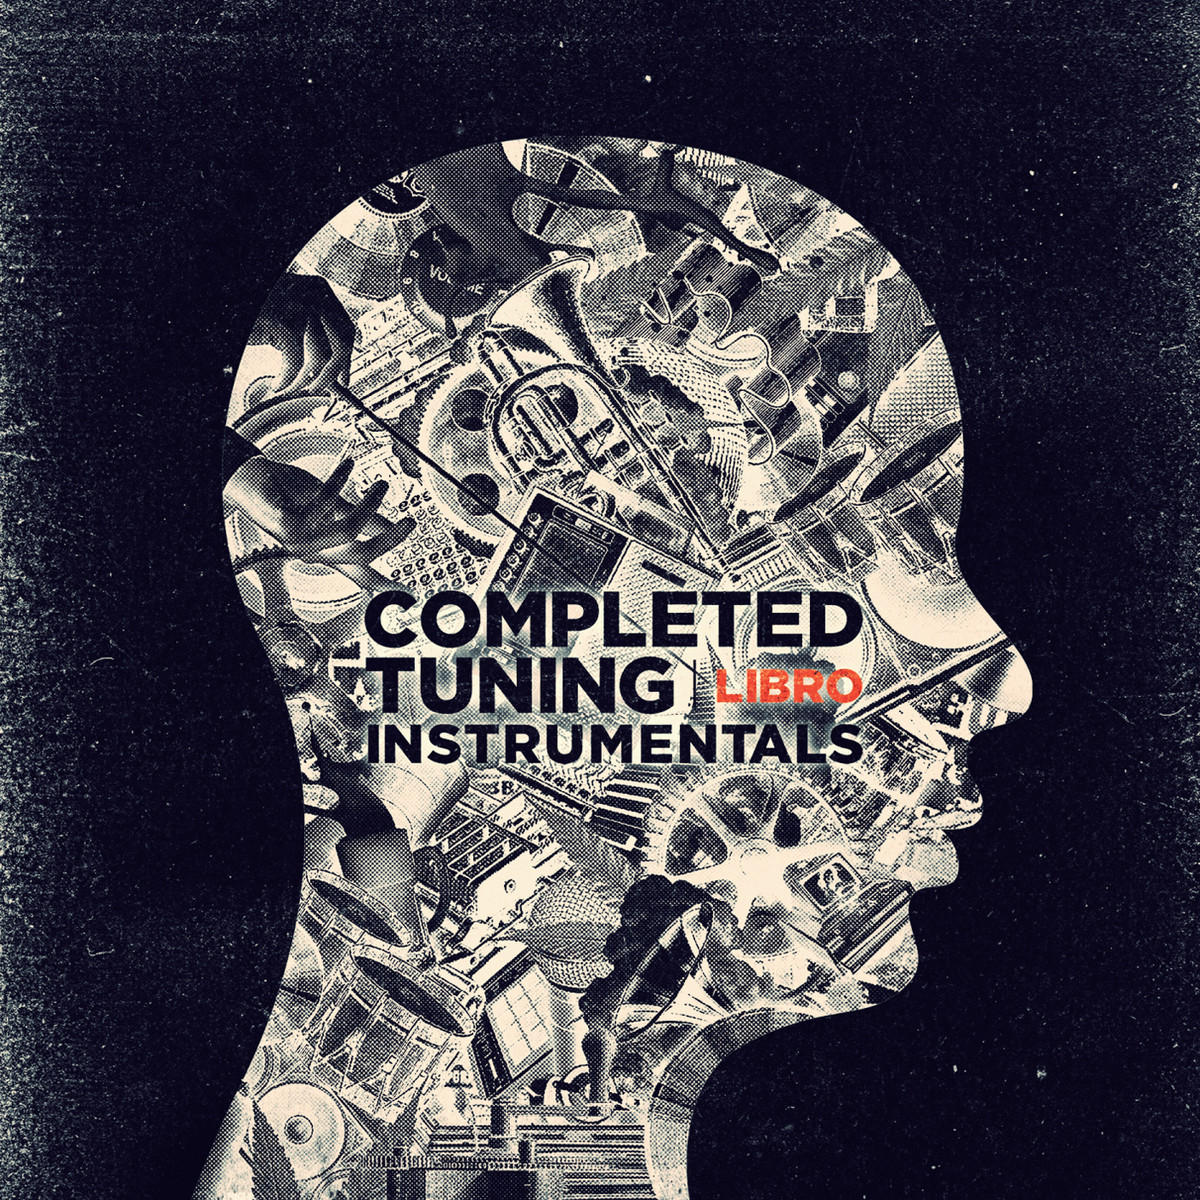 COMPLETED TUNING INSTRUMENTALS